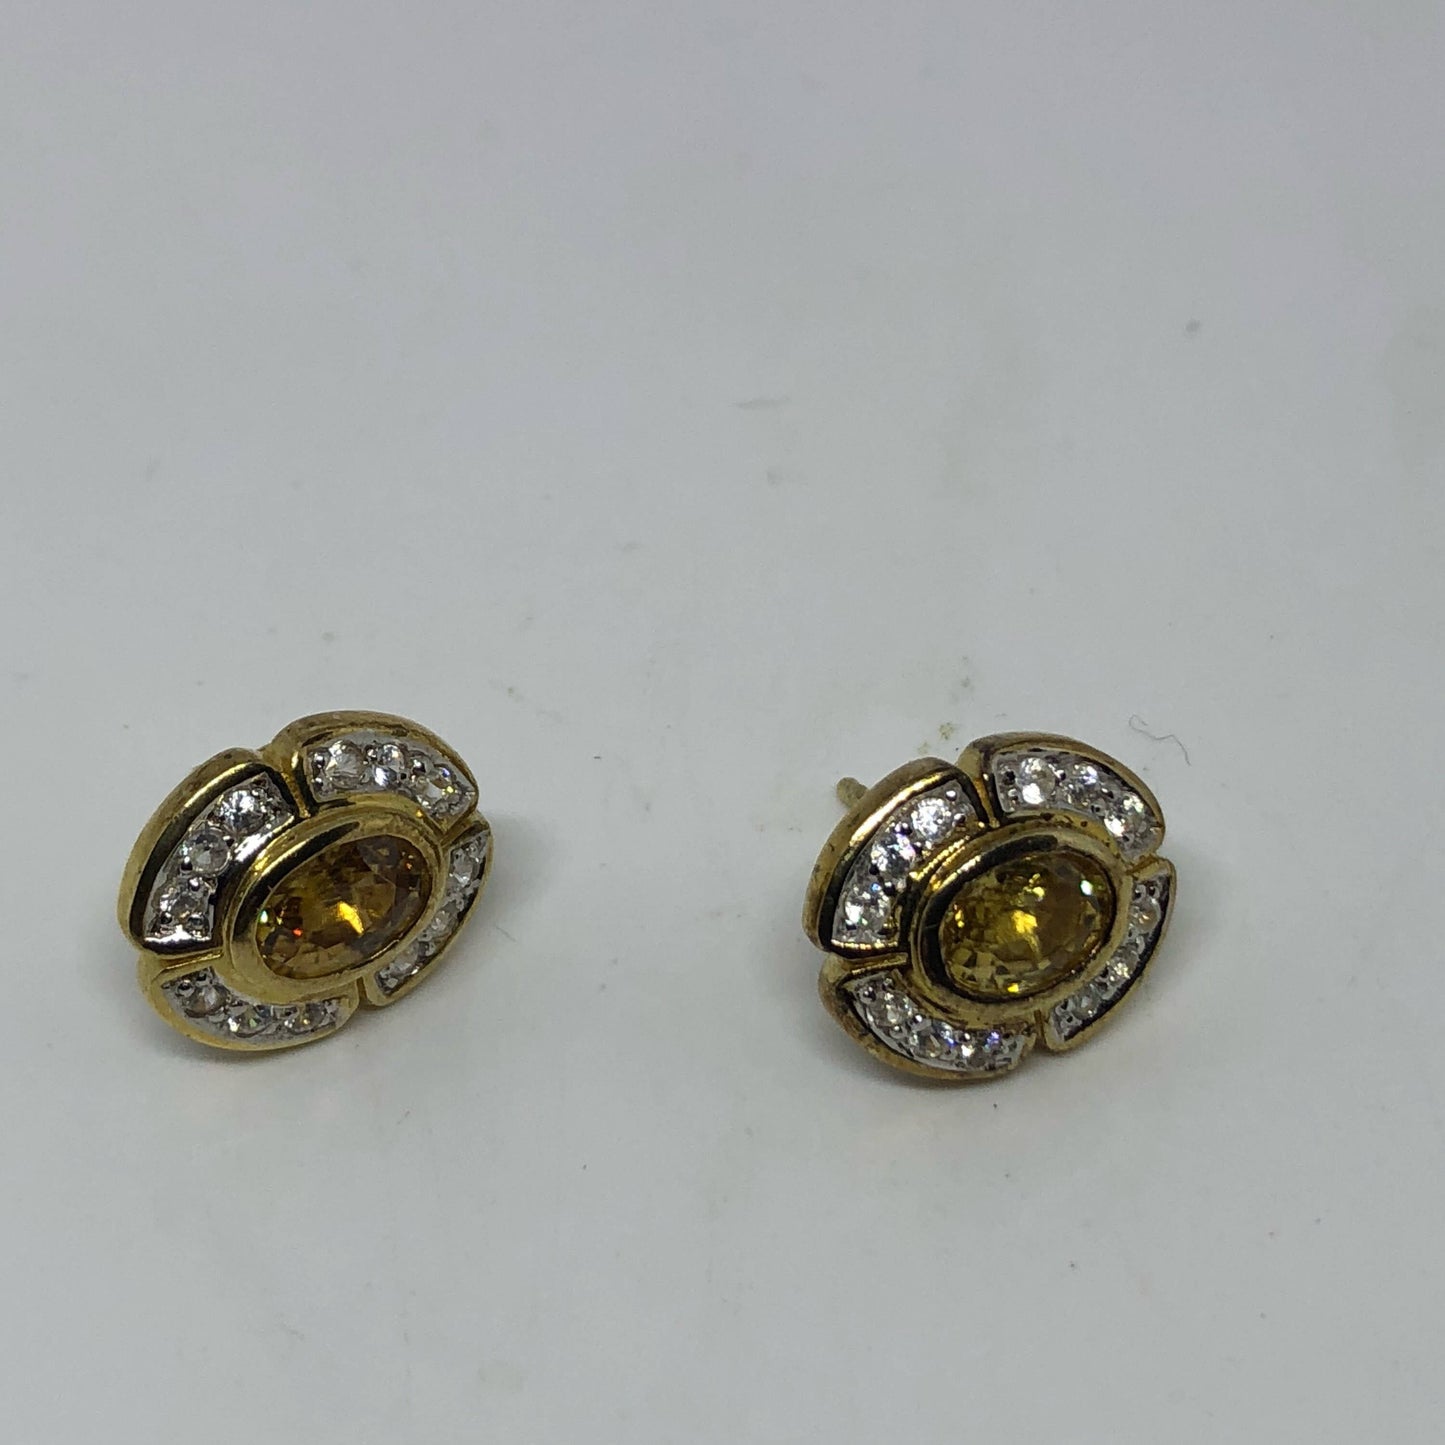 Vintage Citrine Earrings Golden 925 Sterling Silver Deco Studs Button